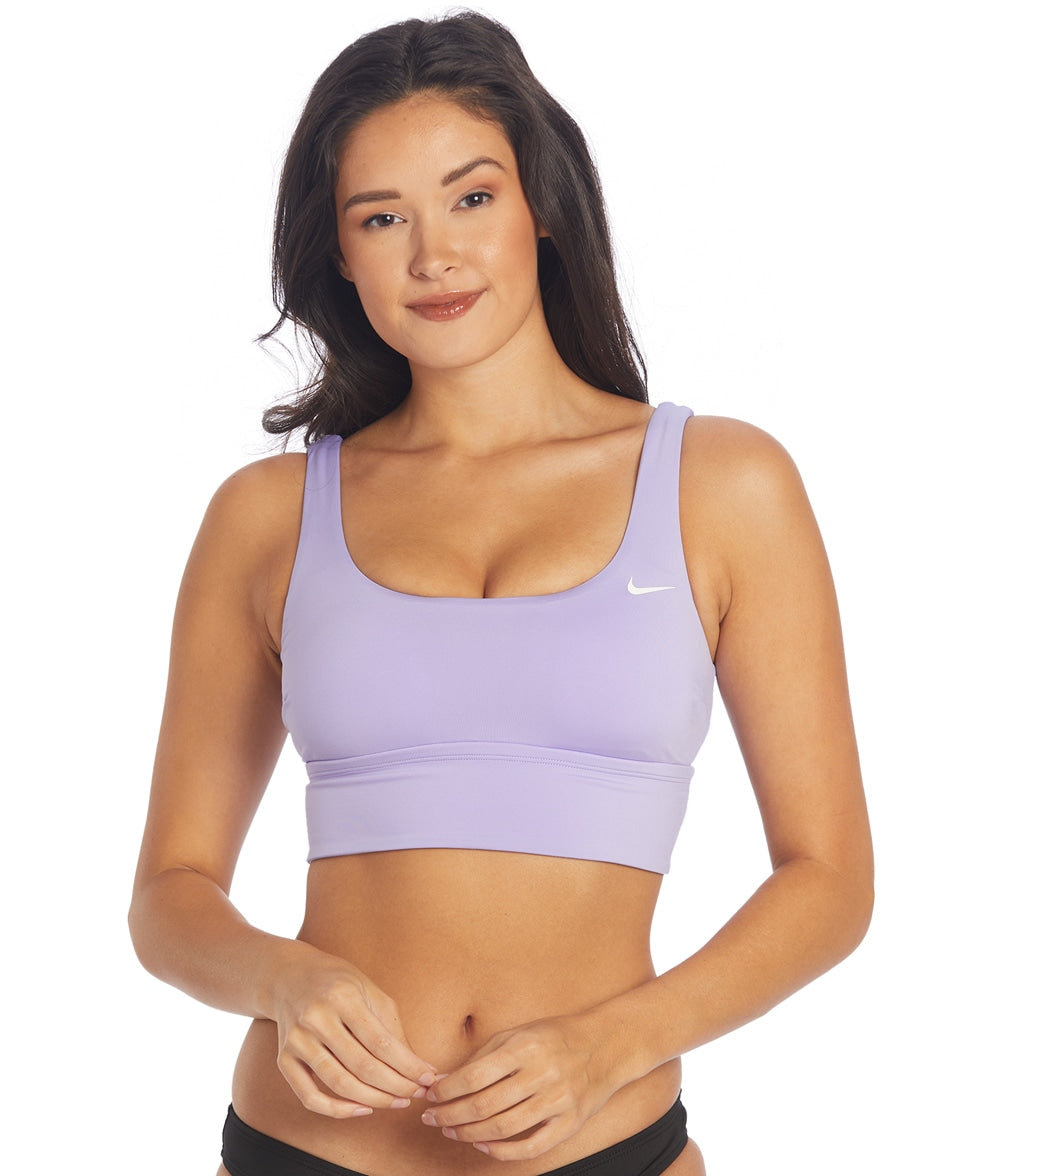 Nike Women's Essential Scoop Neck Midkini Top at